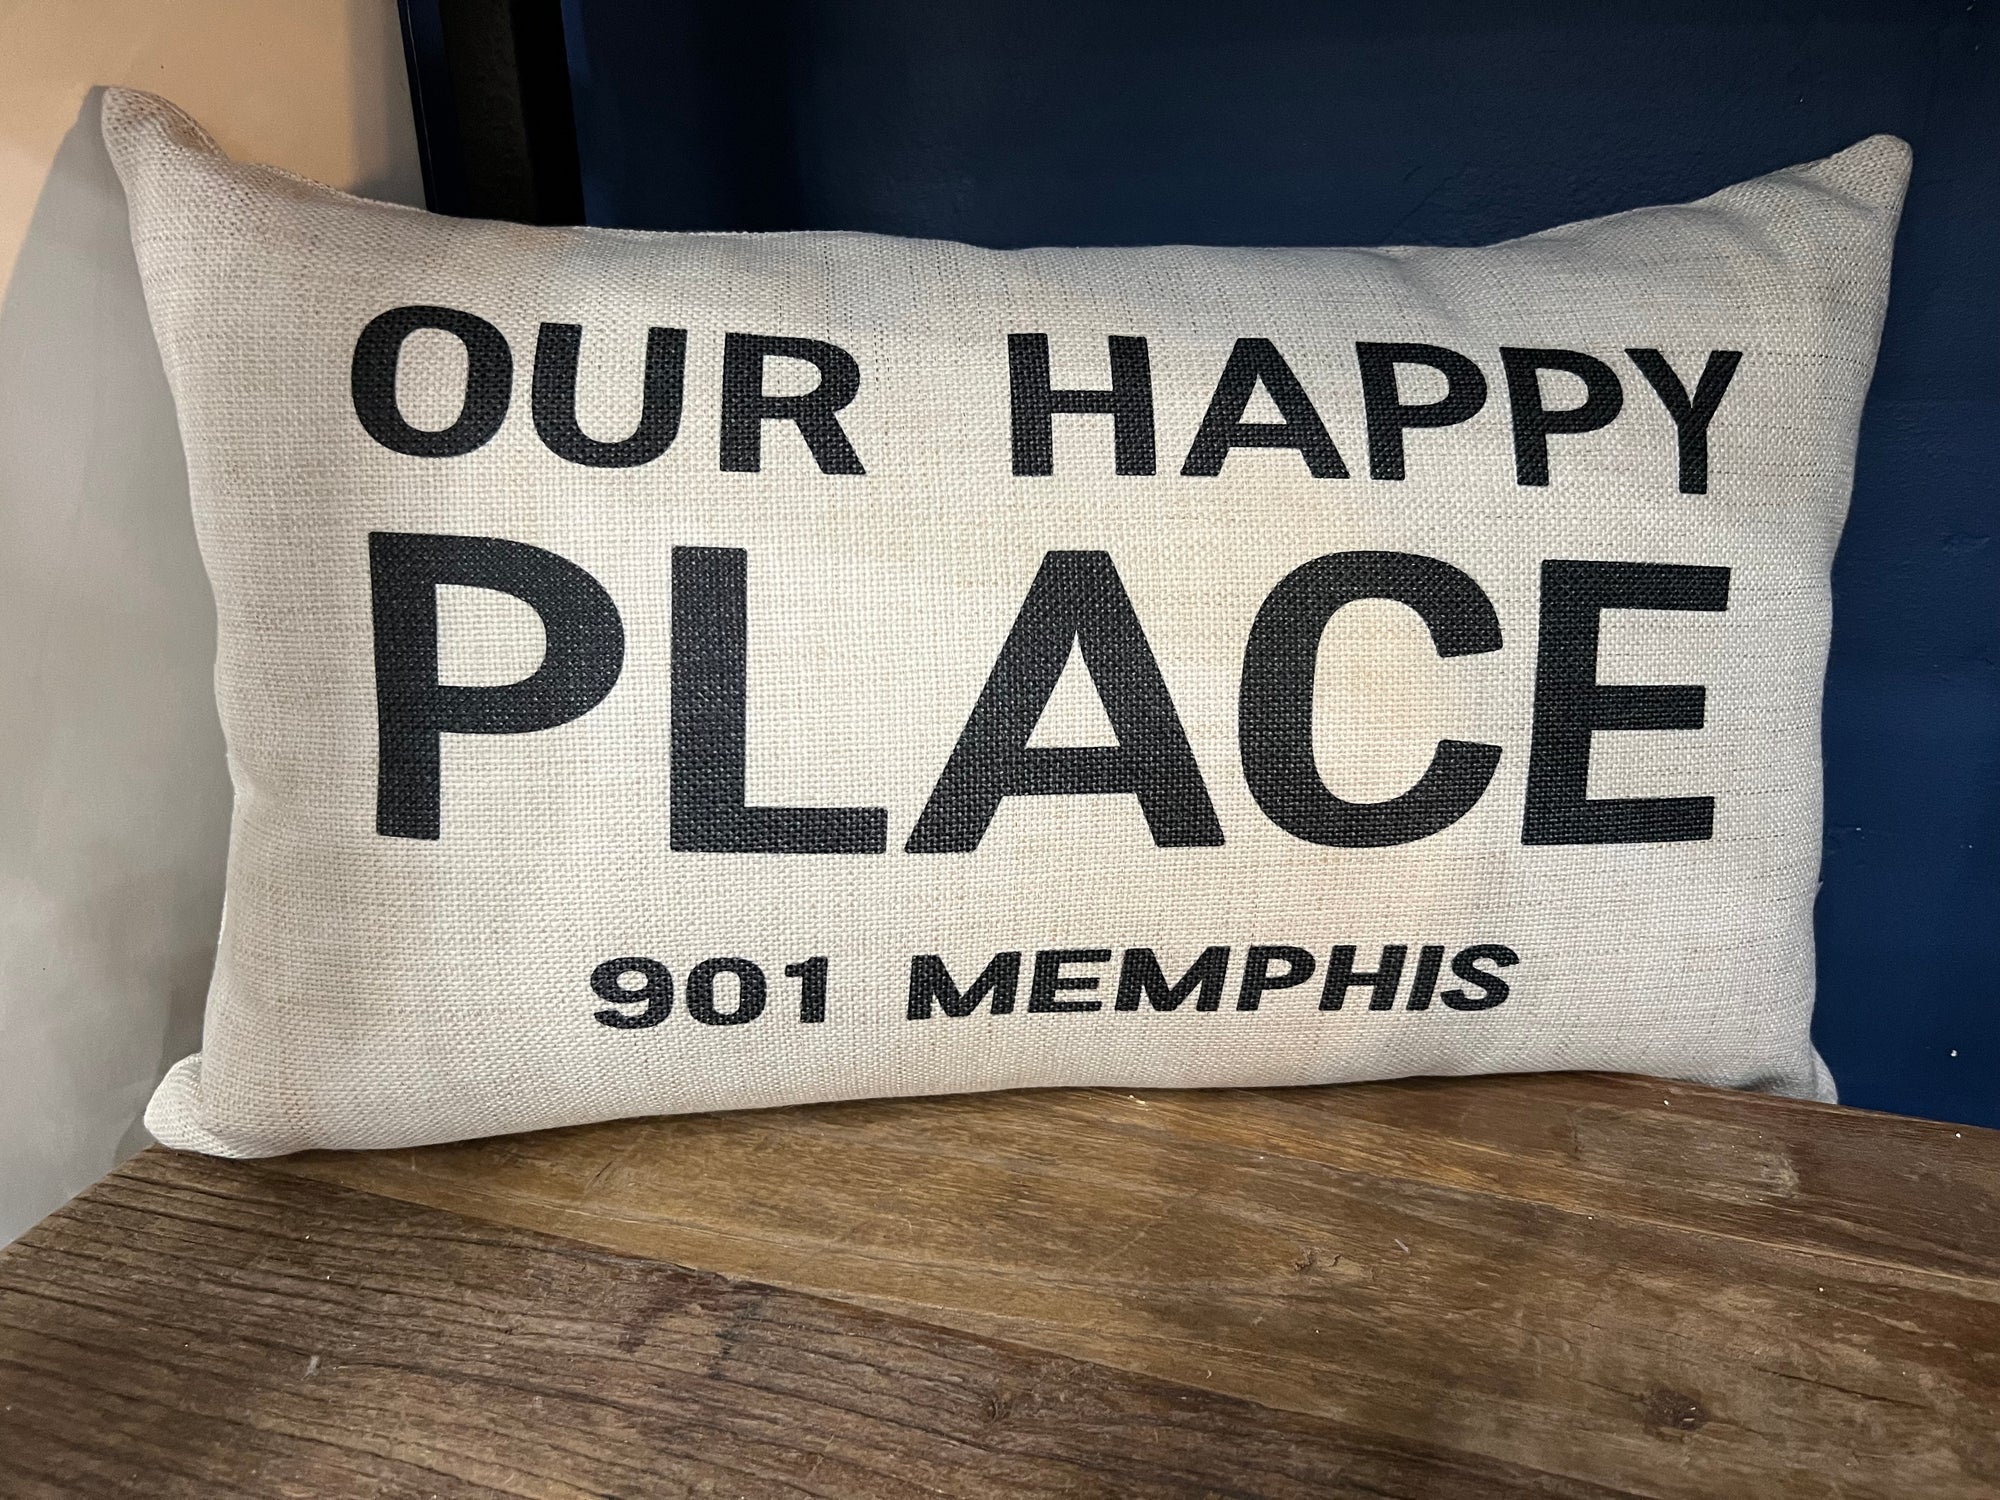 Our Happy Place 901 MEMPHIS: Pillow Cover with Insert